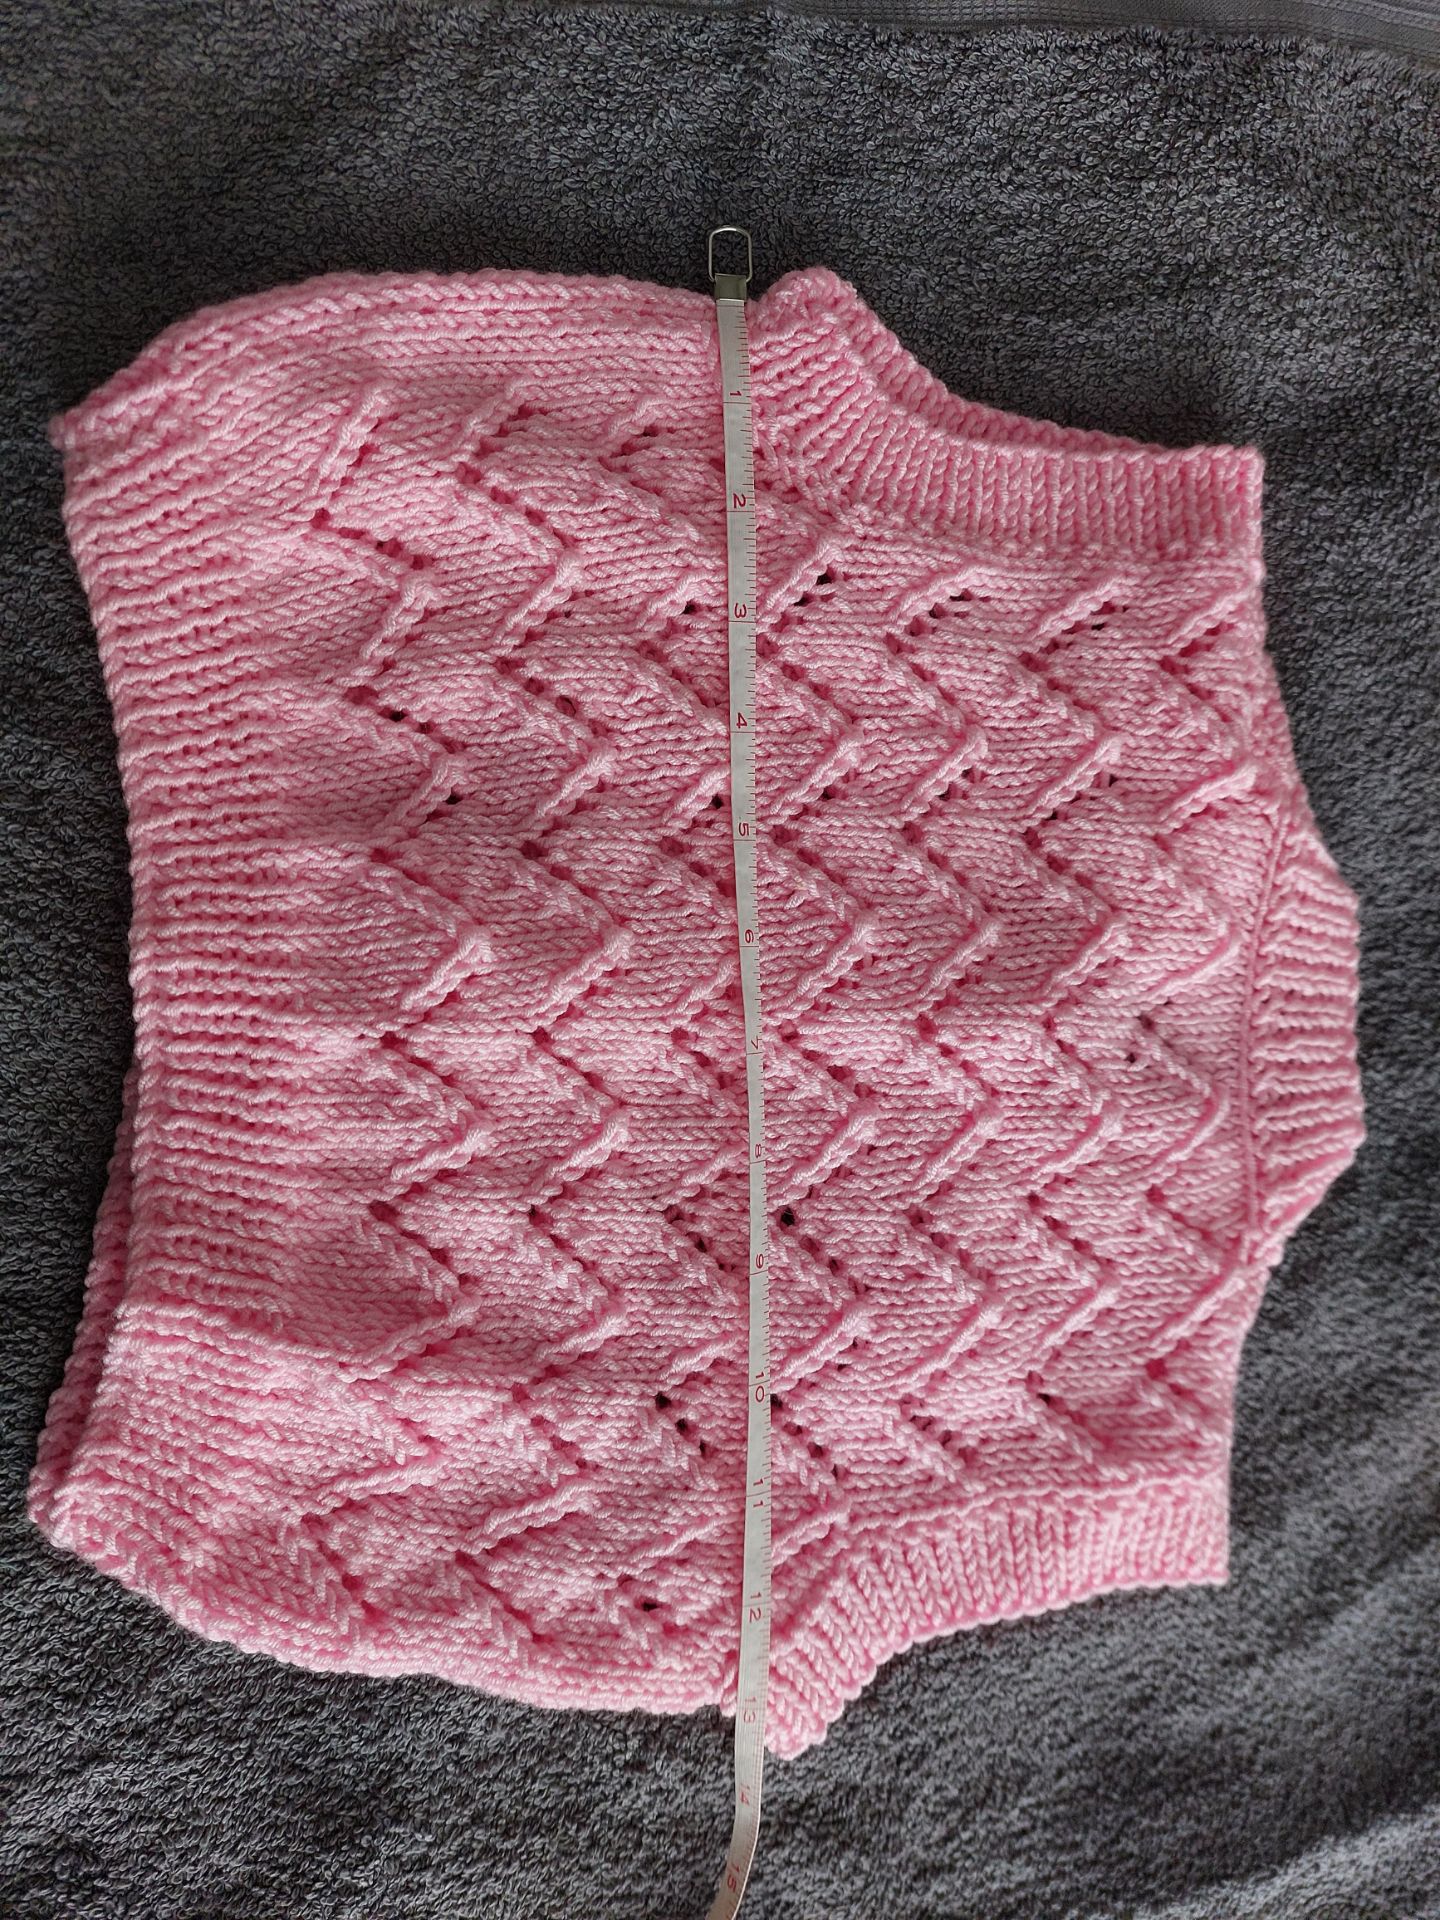 Hand Knitted Gilet - Image 2 of 6